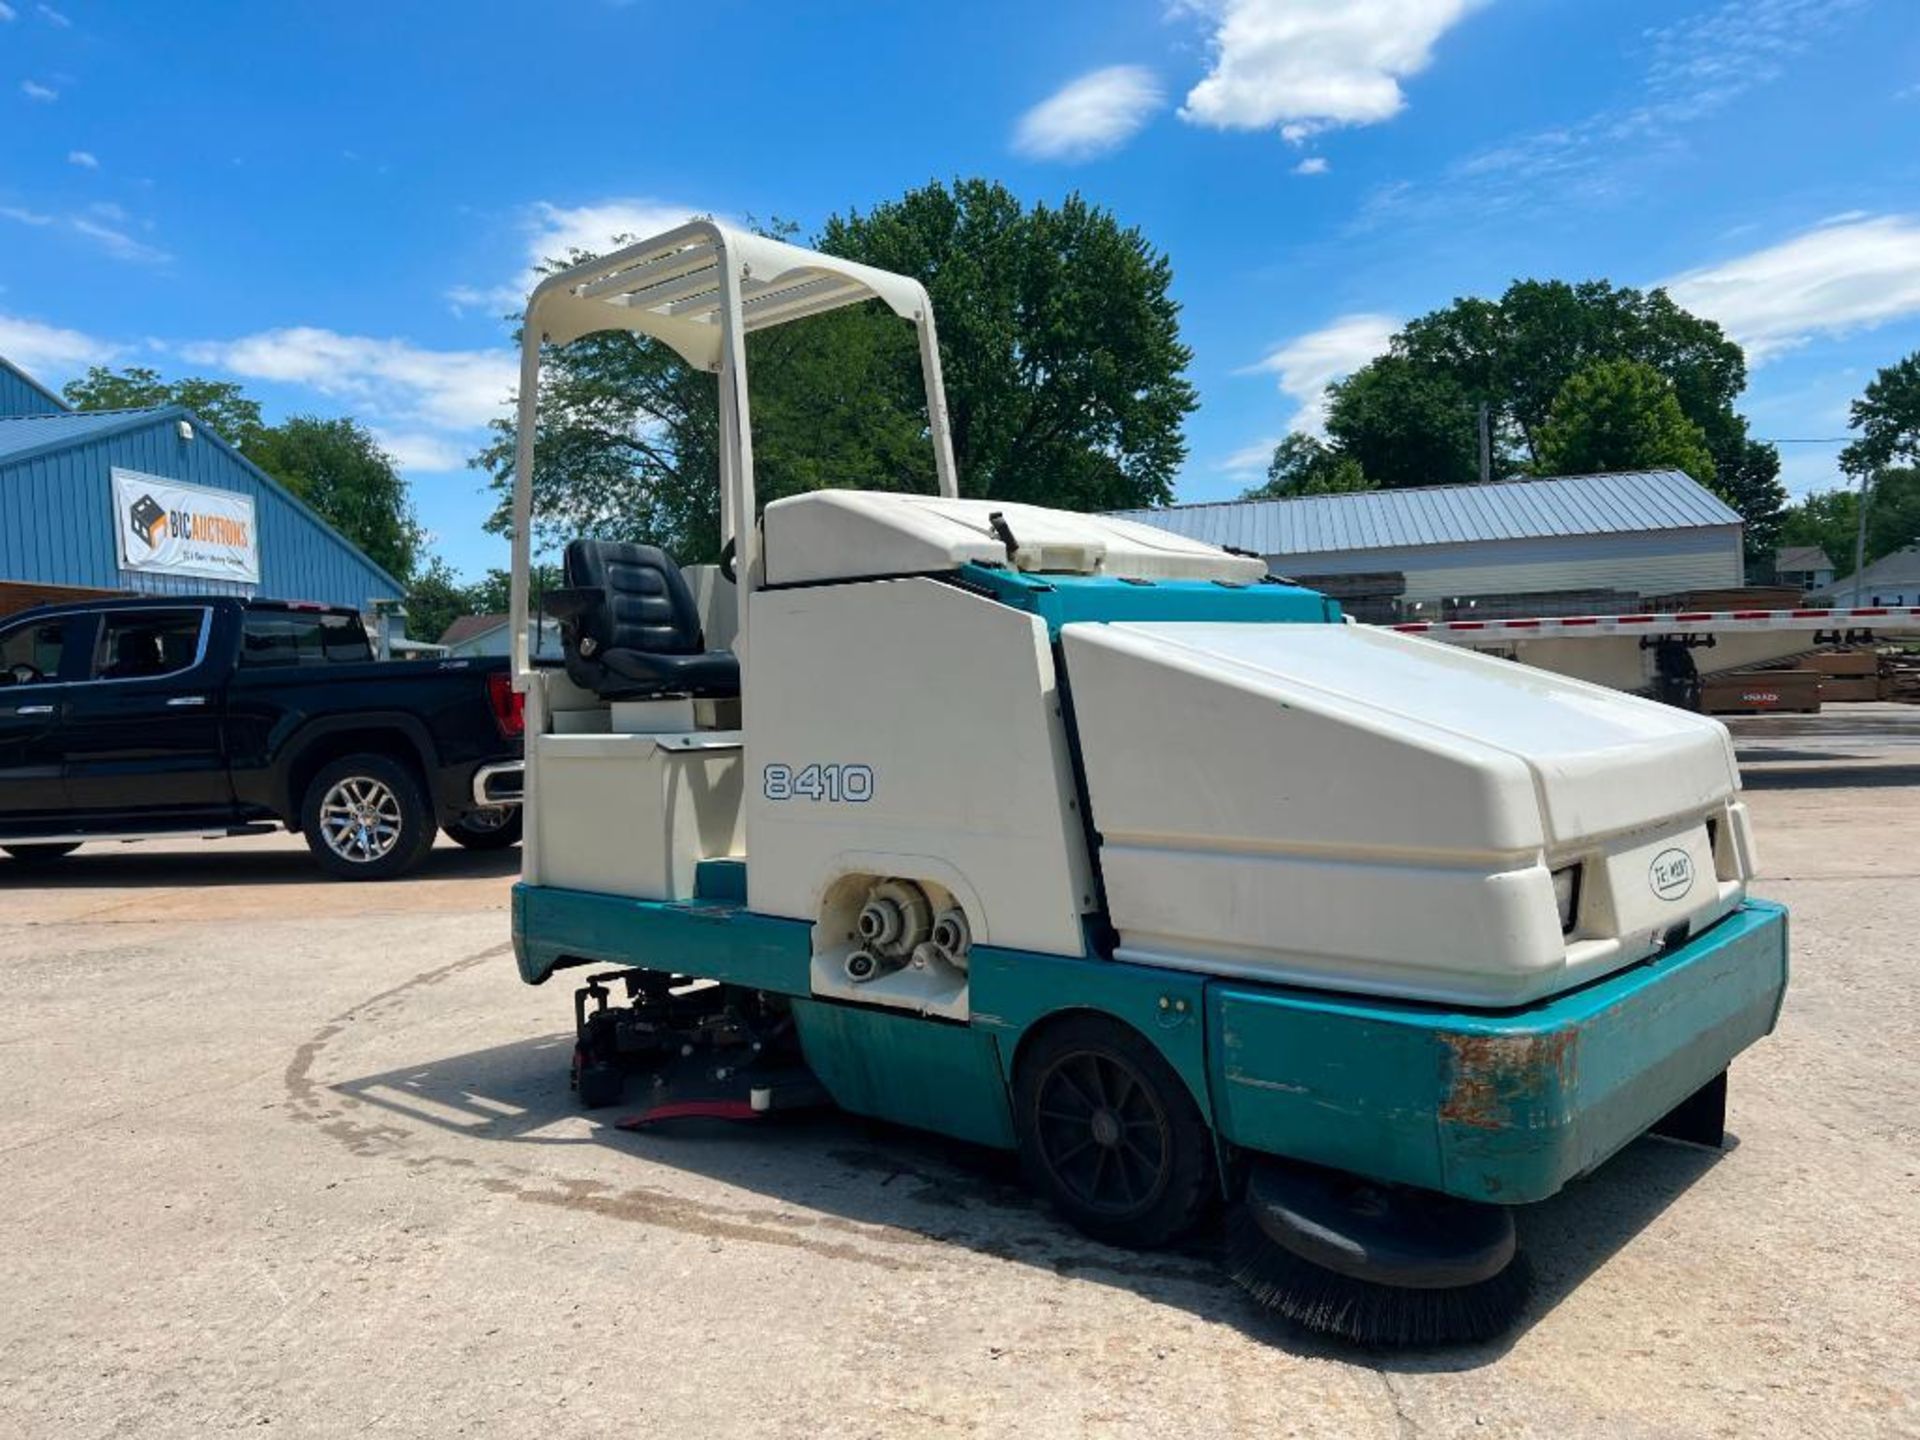 Tennant 8410 Sweeper/Scrubber. Located in Mt. Pleasant, IA - Image 6 of 27